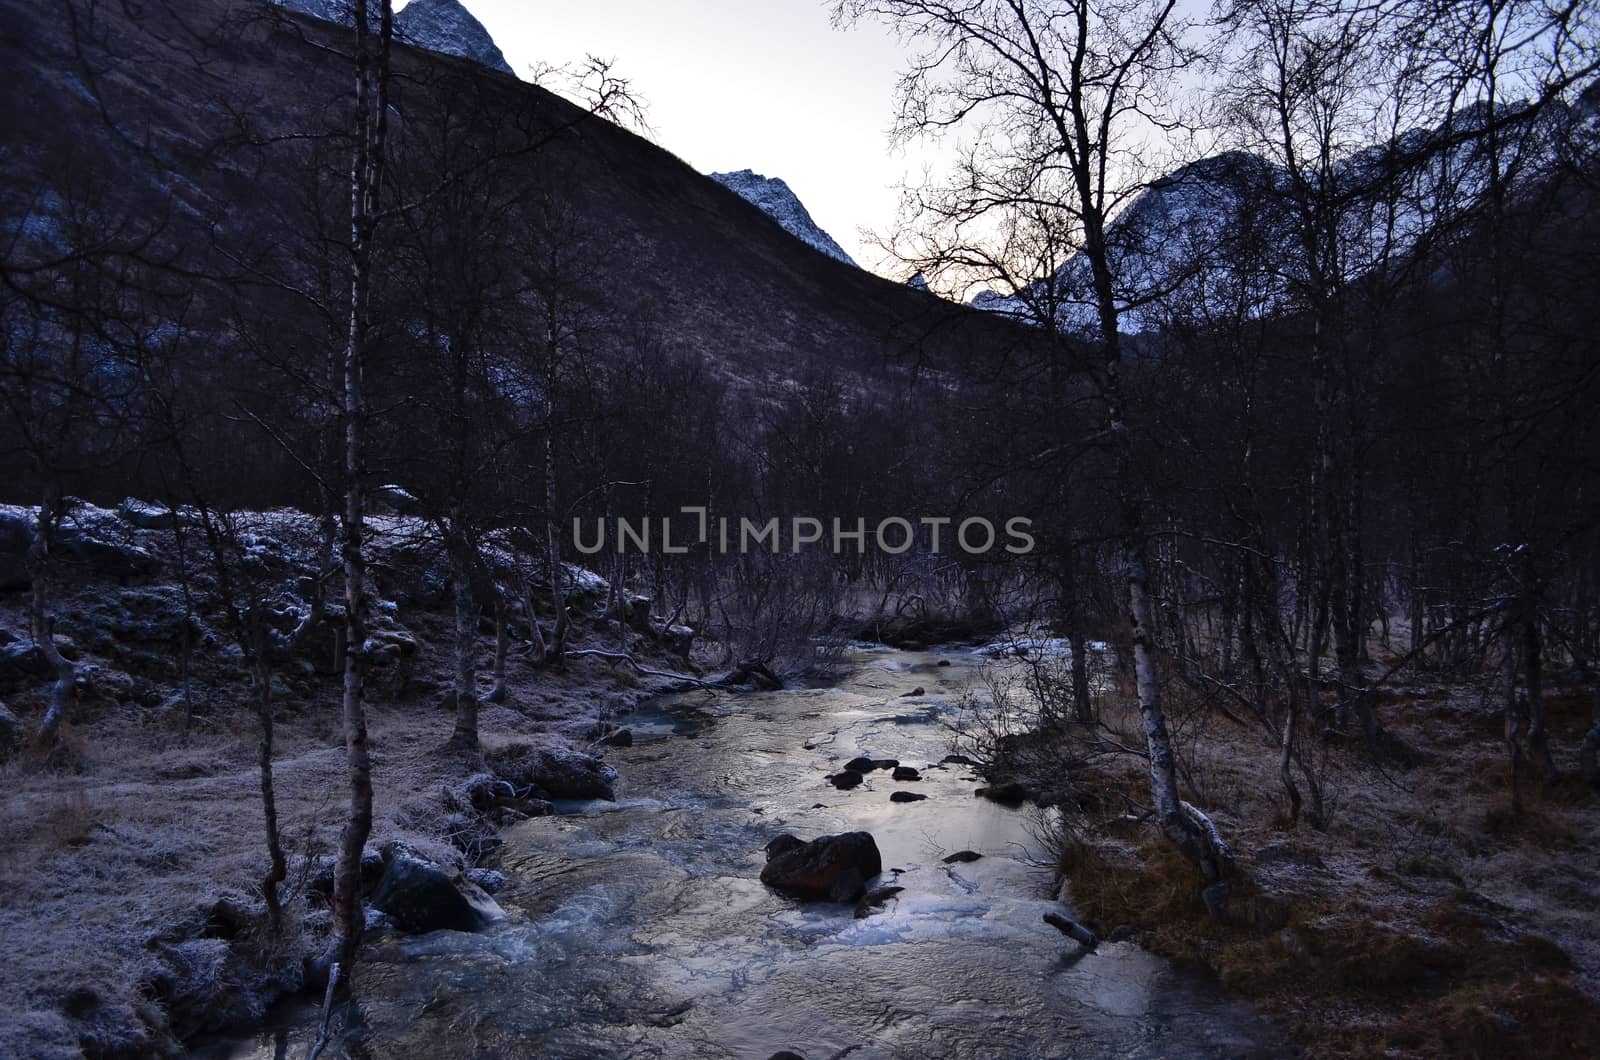 The mountain river heading from the glacier in Northern Norway